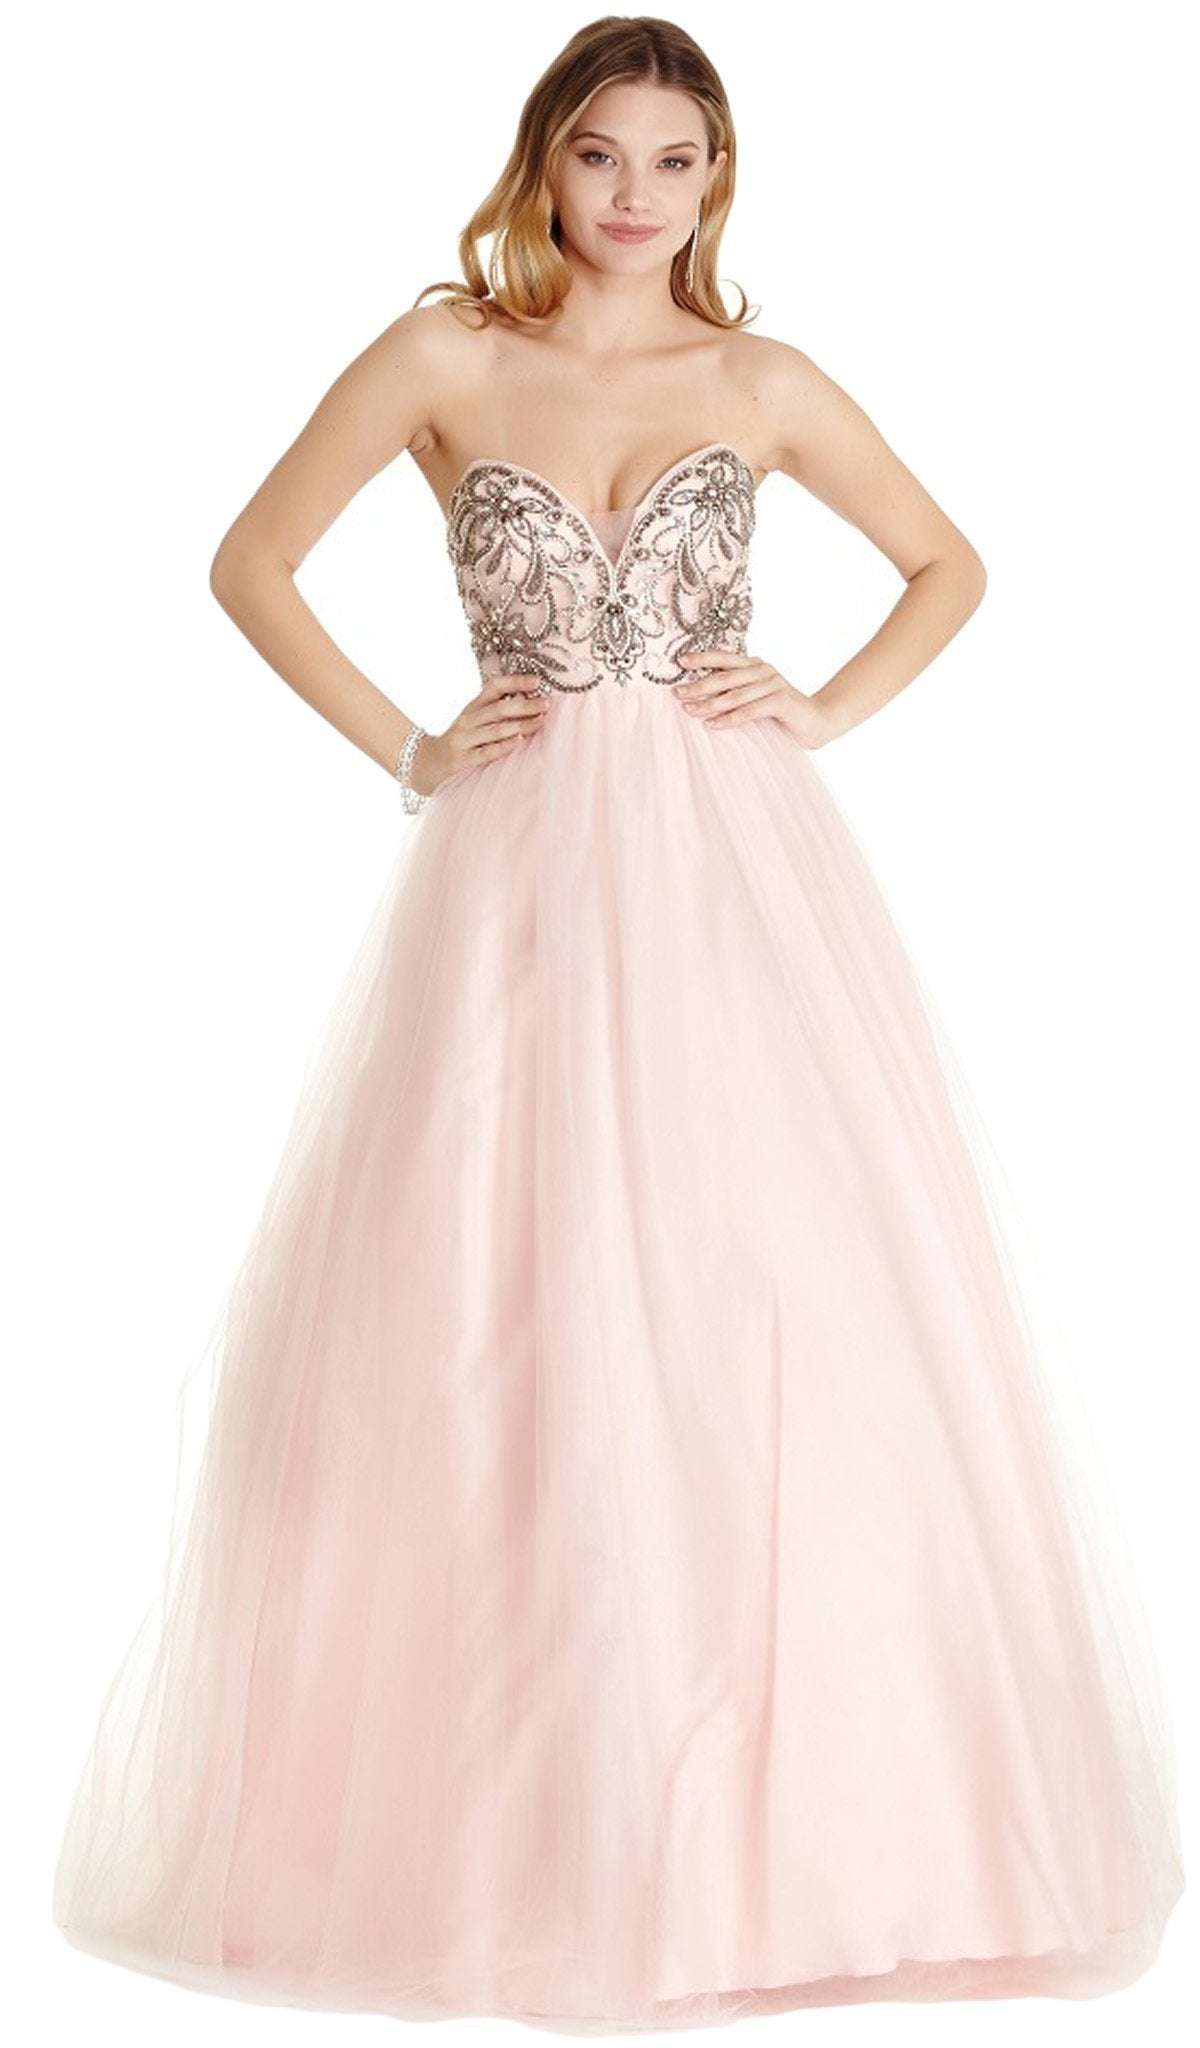 Aspeed Design - Embellished Sweetheart Quinceanera
